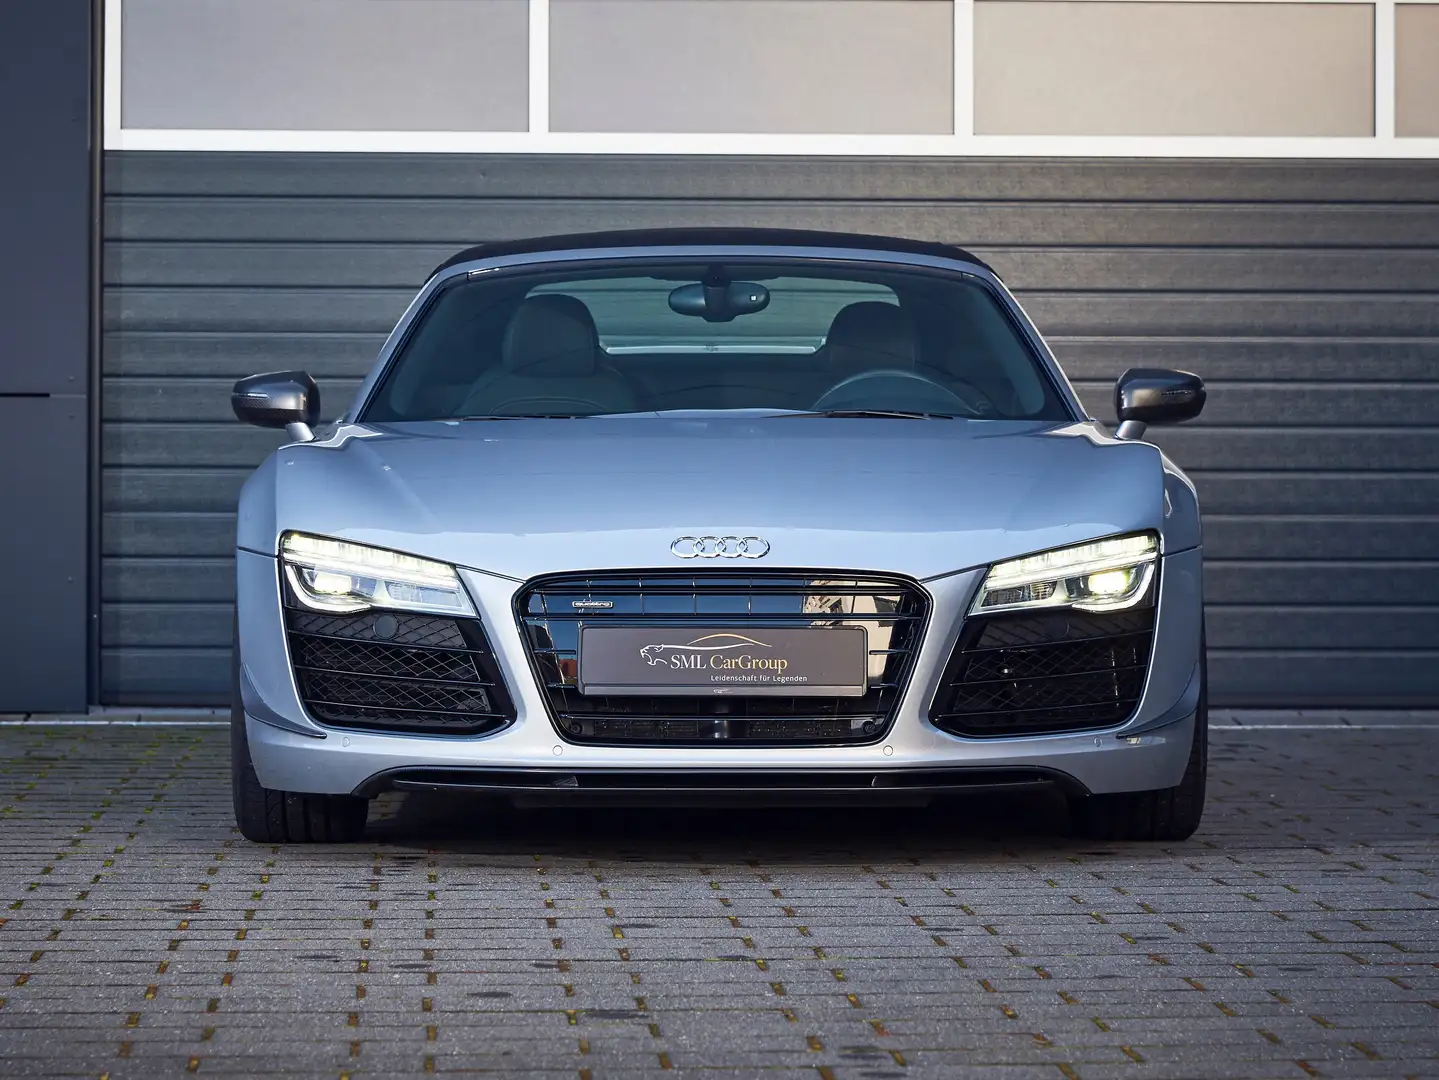 Audi R8 5.2 Spyder - Limited LeMans Edition - No. 01 of 30 Silver - 2